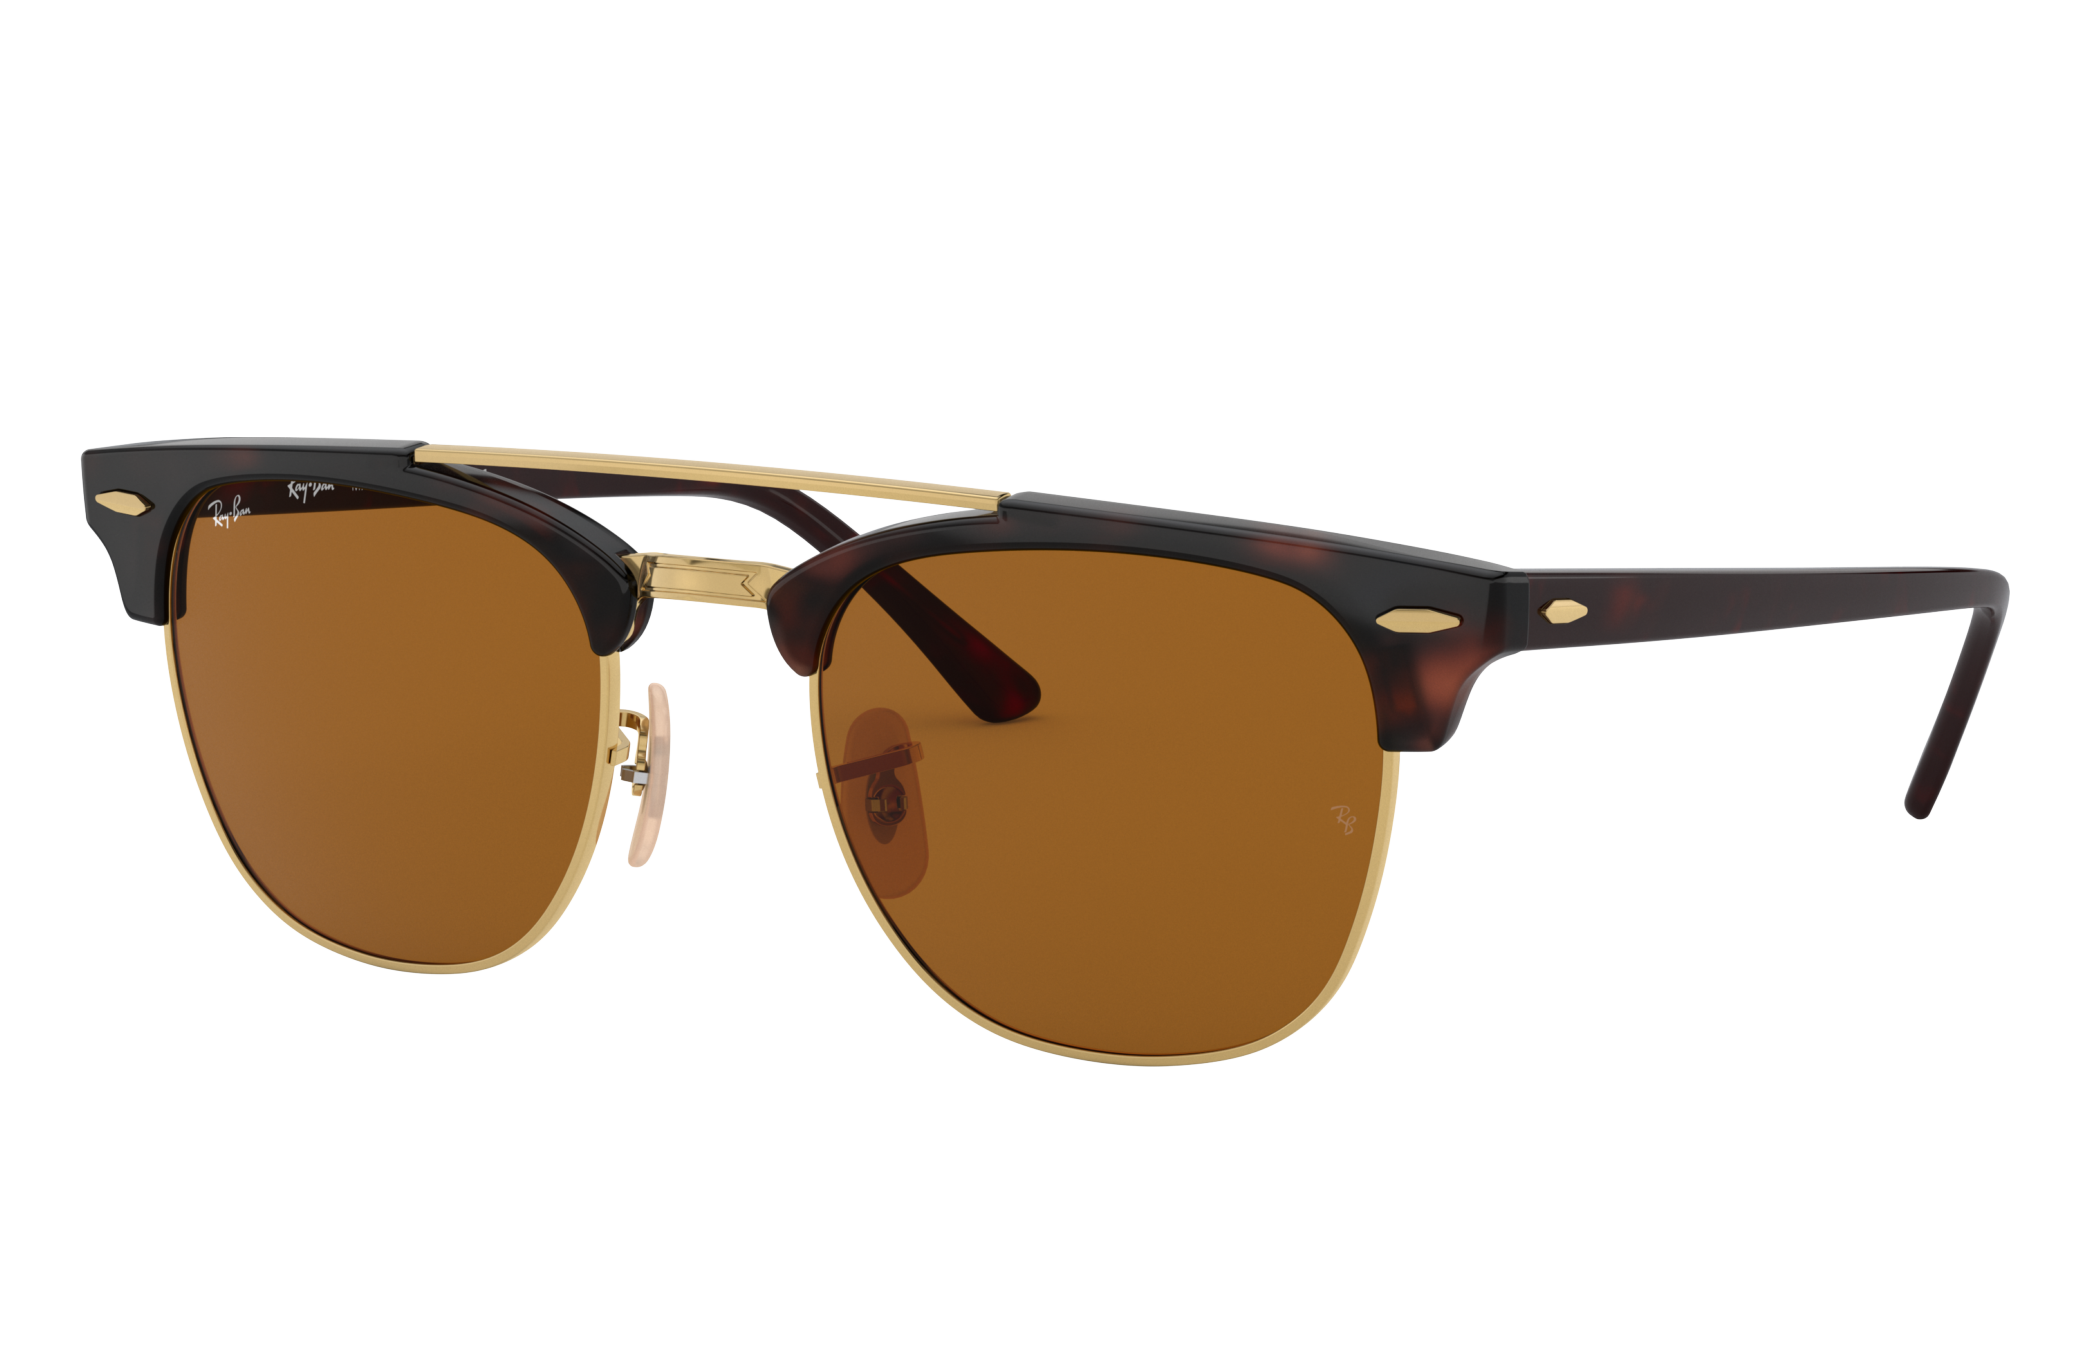 Check out the Clubmaster Double Bridge at ray-ban.com